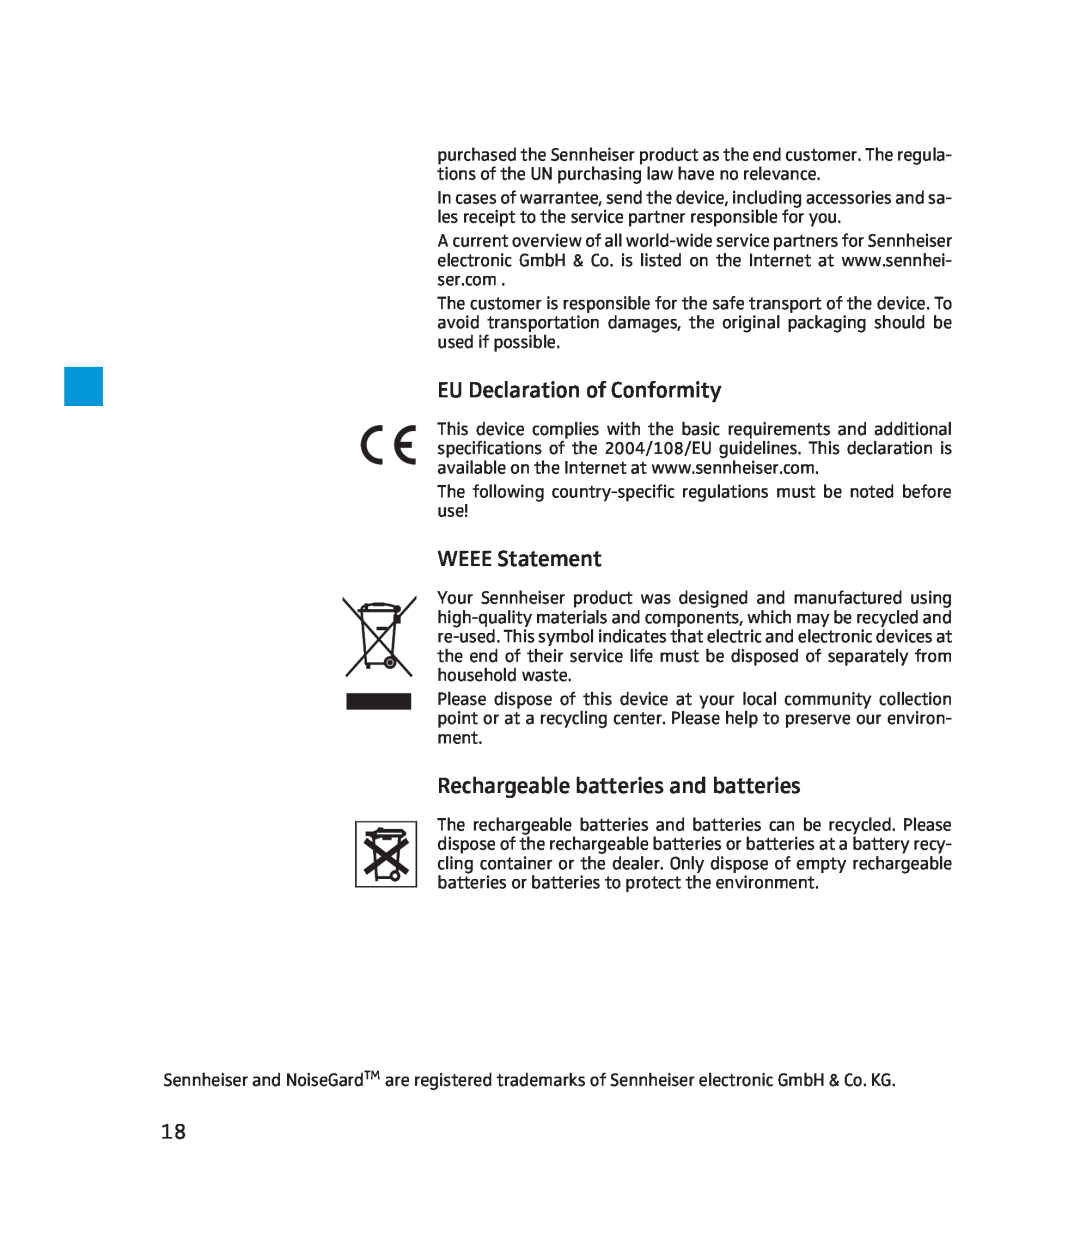 Sennheiser PXC 450 instruction manual EU Declaration of Conformity, WEEE Statement, Rechargeable batteries and batteries 